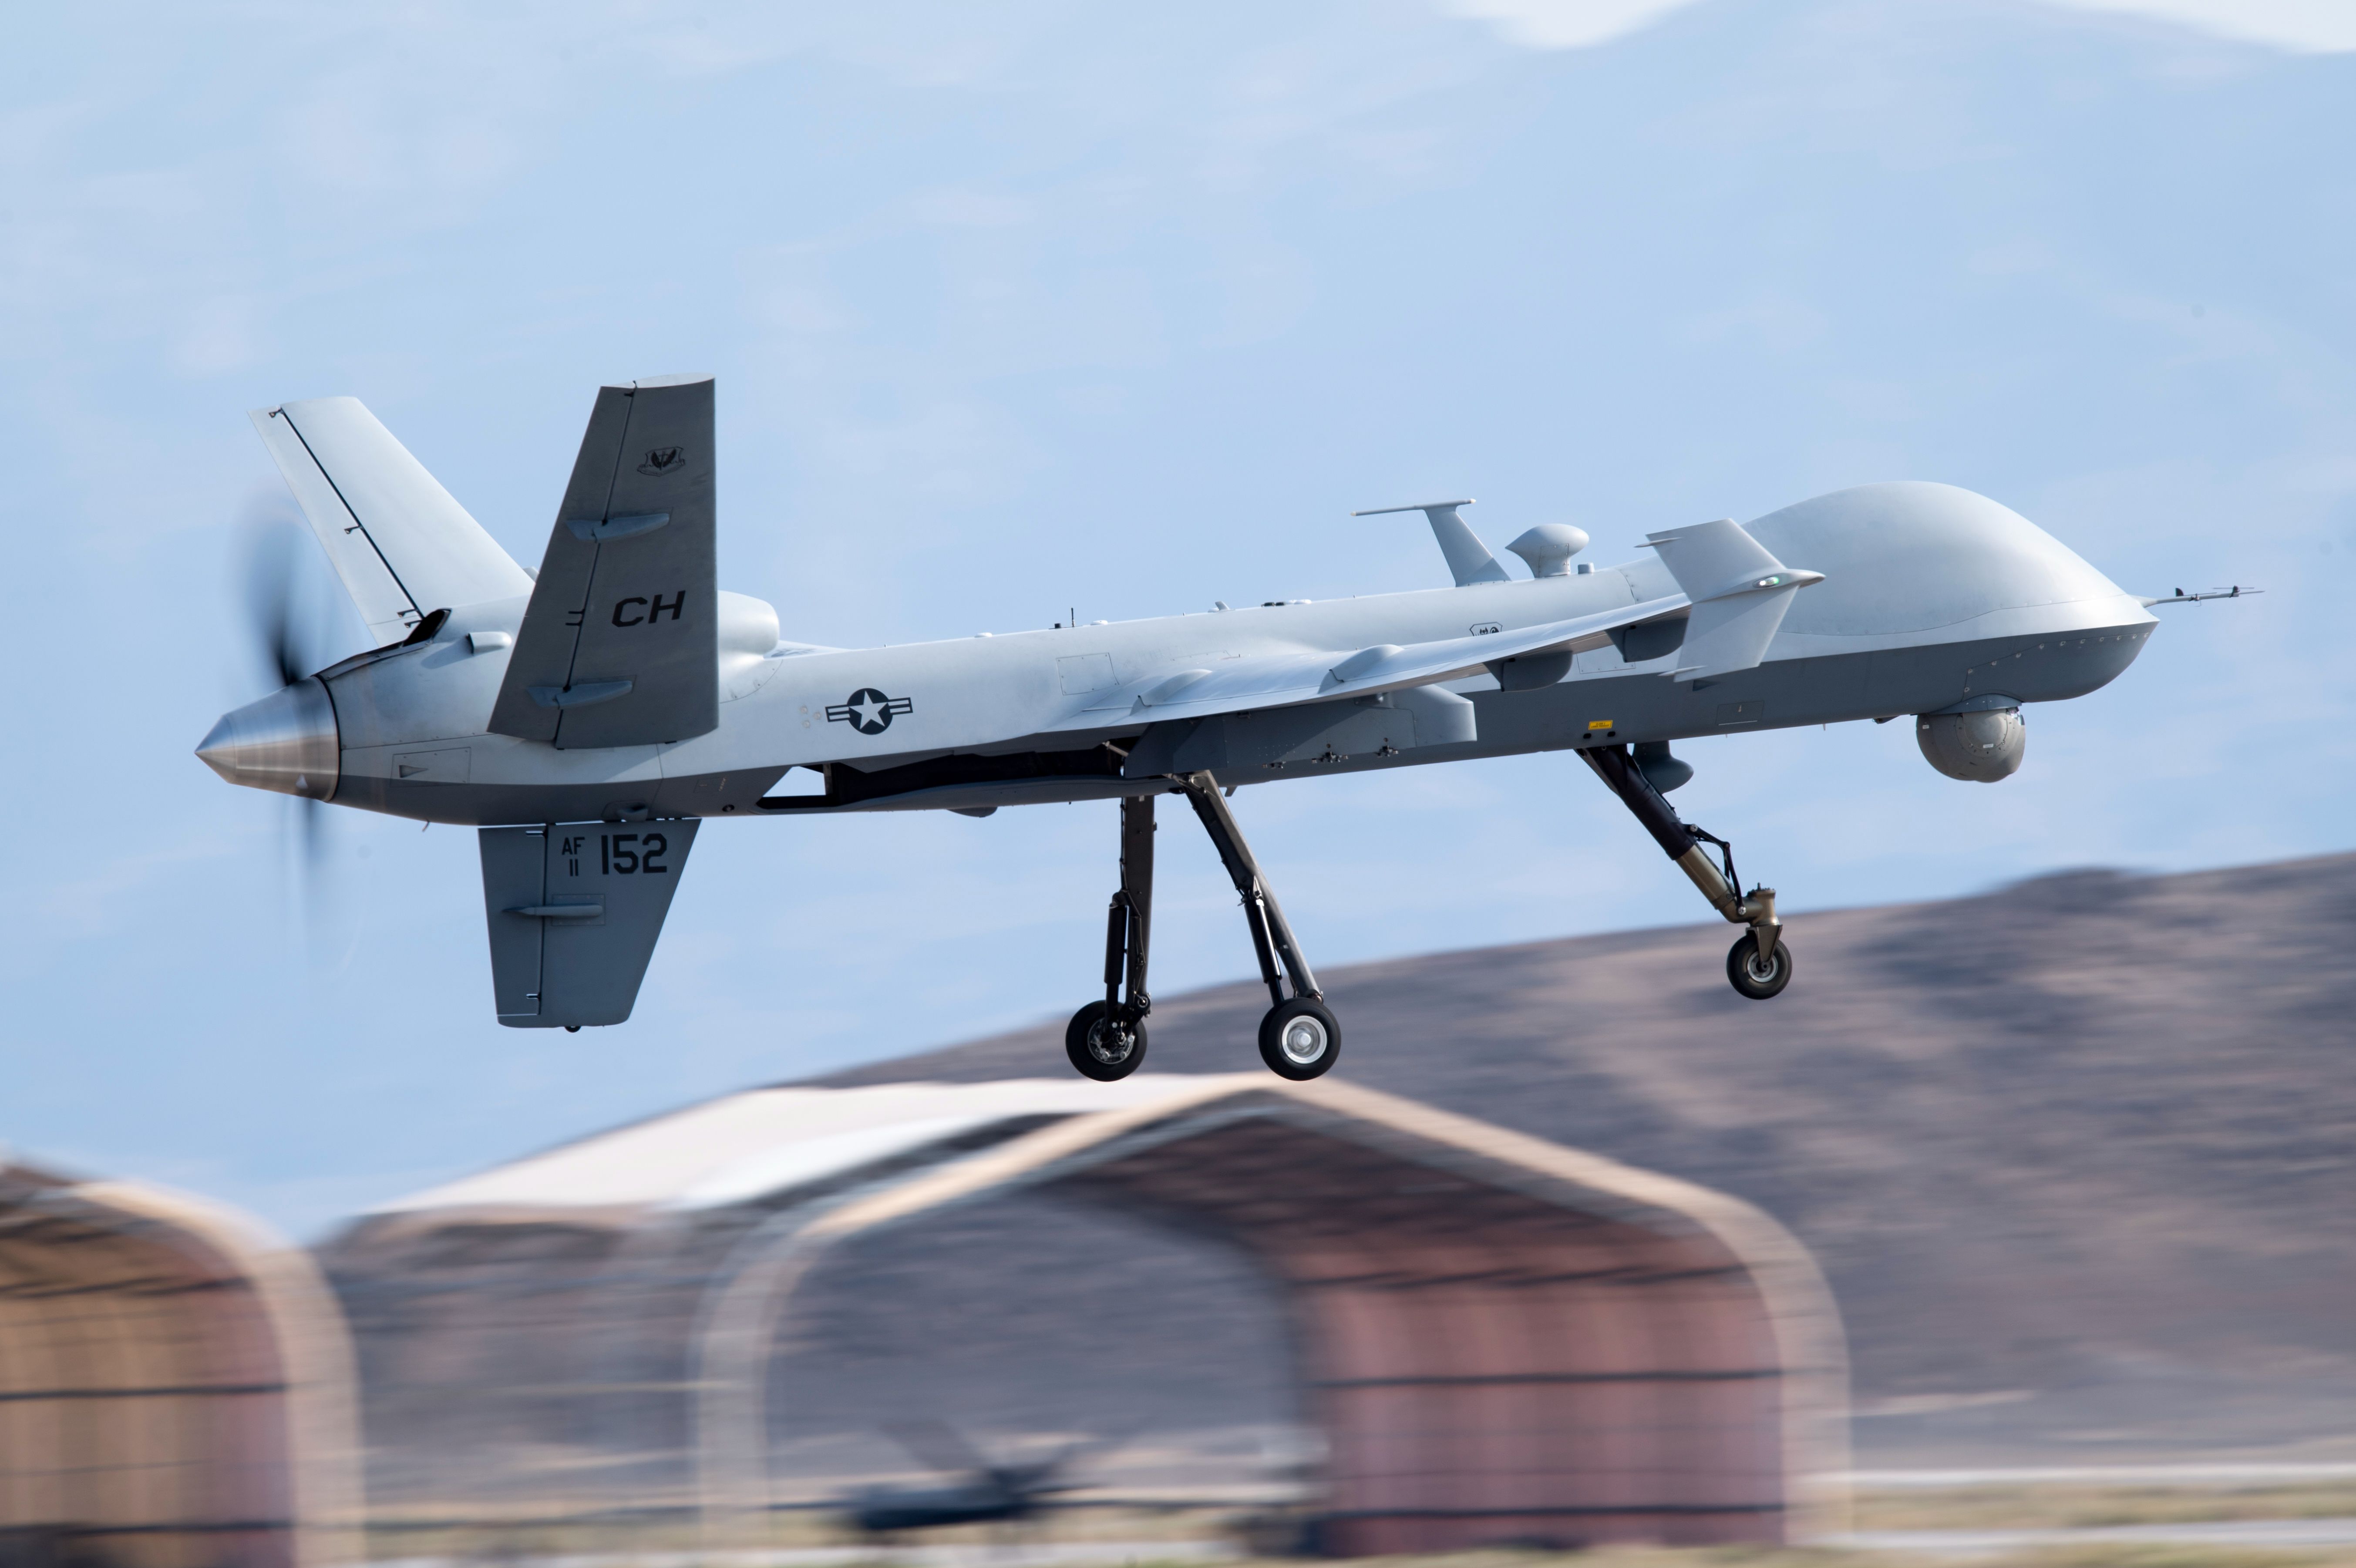 A U.S. Air Force MQ-9 Reaper assigned to the 432nd Wing/432nd Air Expeditionary Wing, takes off from the flightline at Creech Air Force Base, Nevada, Sept. 1, 2021. The 432nd Wing/432nd Expeditionary Wing hosts the global Remotely Piloted Aircraft enterprise. (U.S. Air Force photo by Tech. Sgt. Emerson Nuñez)